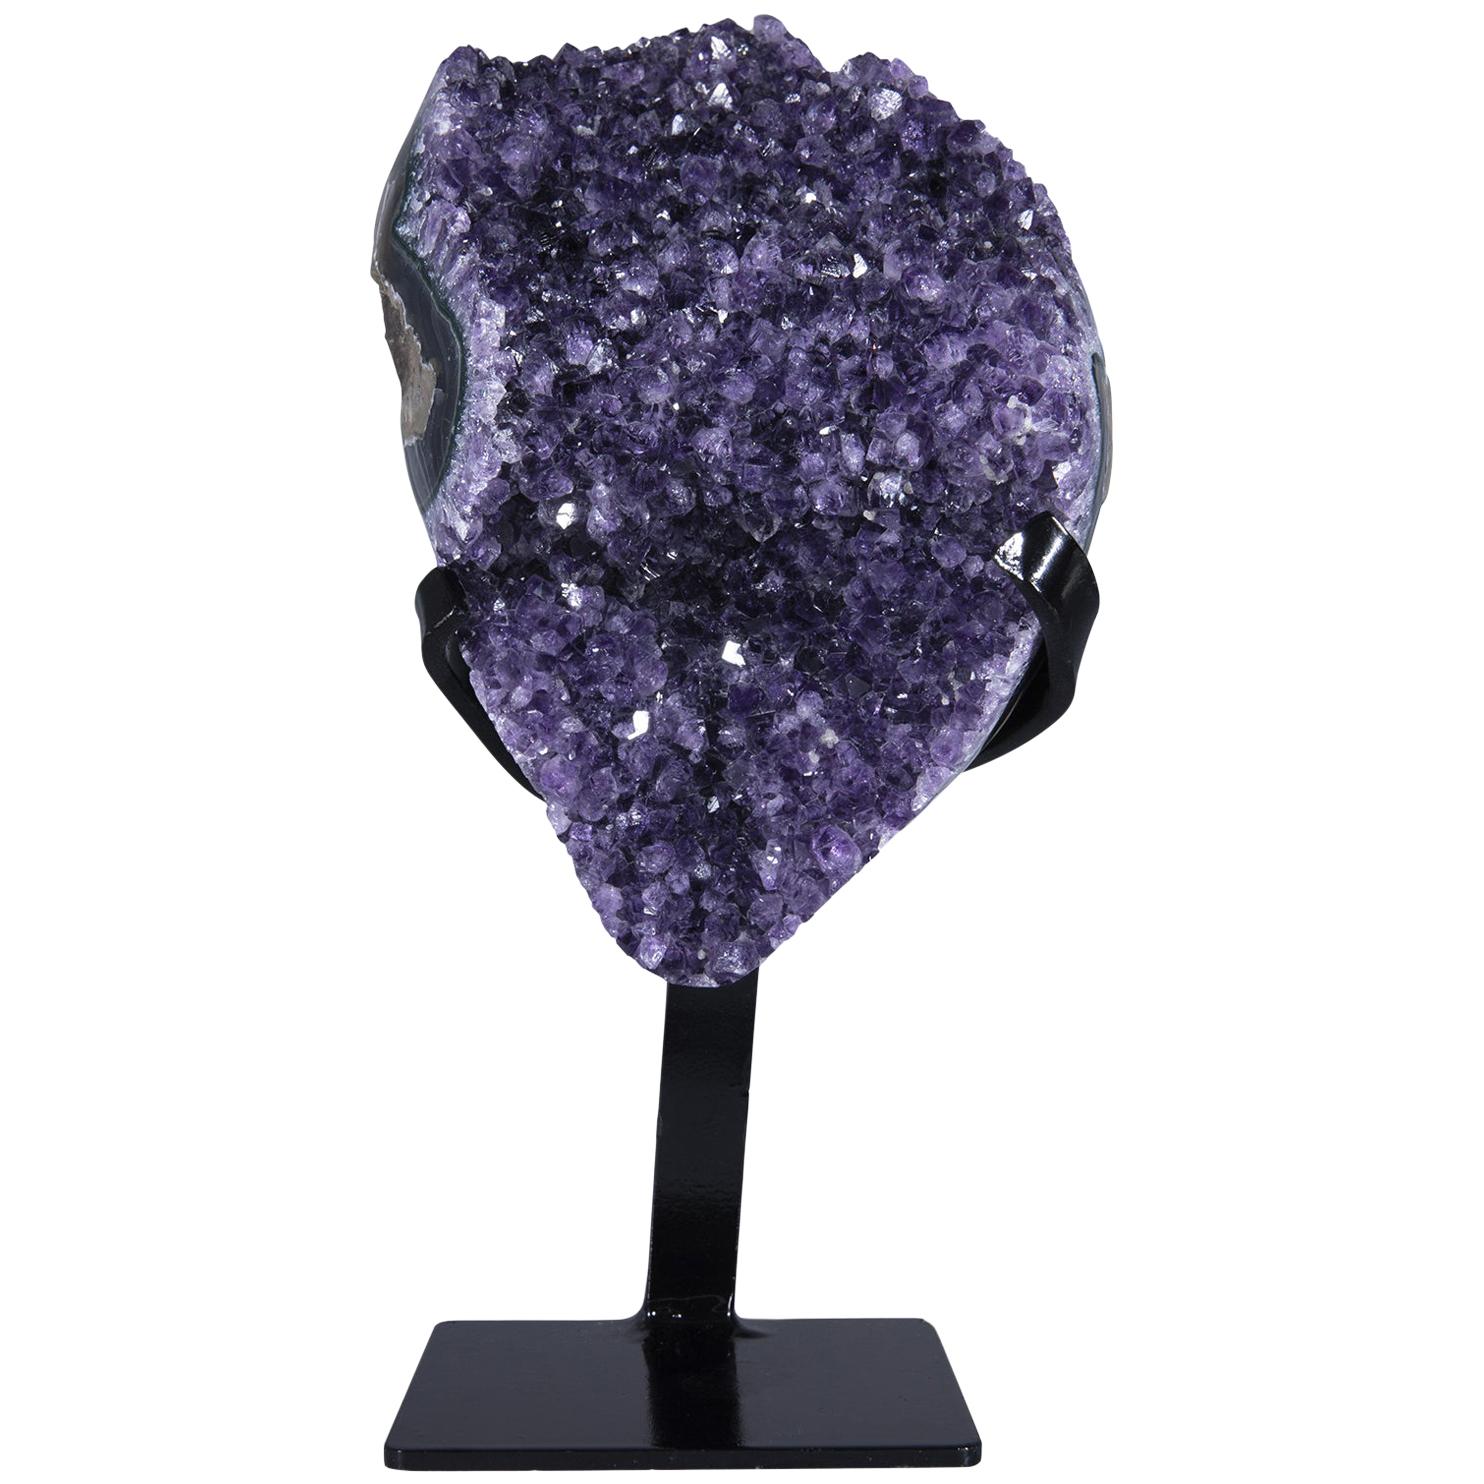 Amethyst Cluster with White Quartz and Green Celadonite Crystals